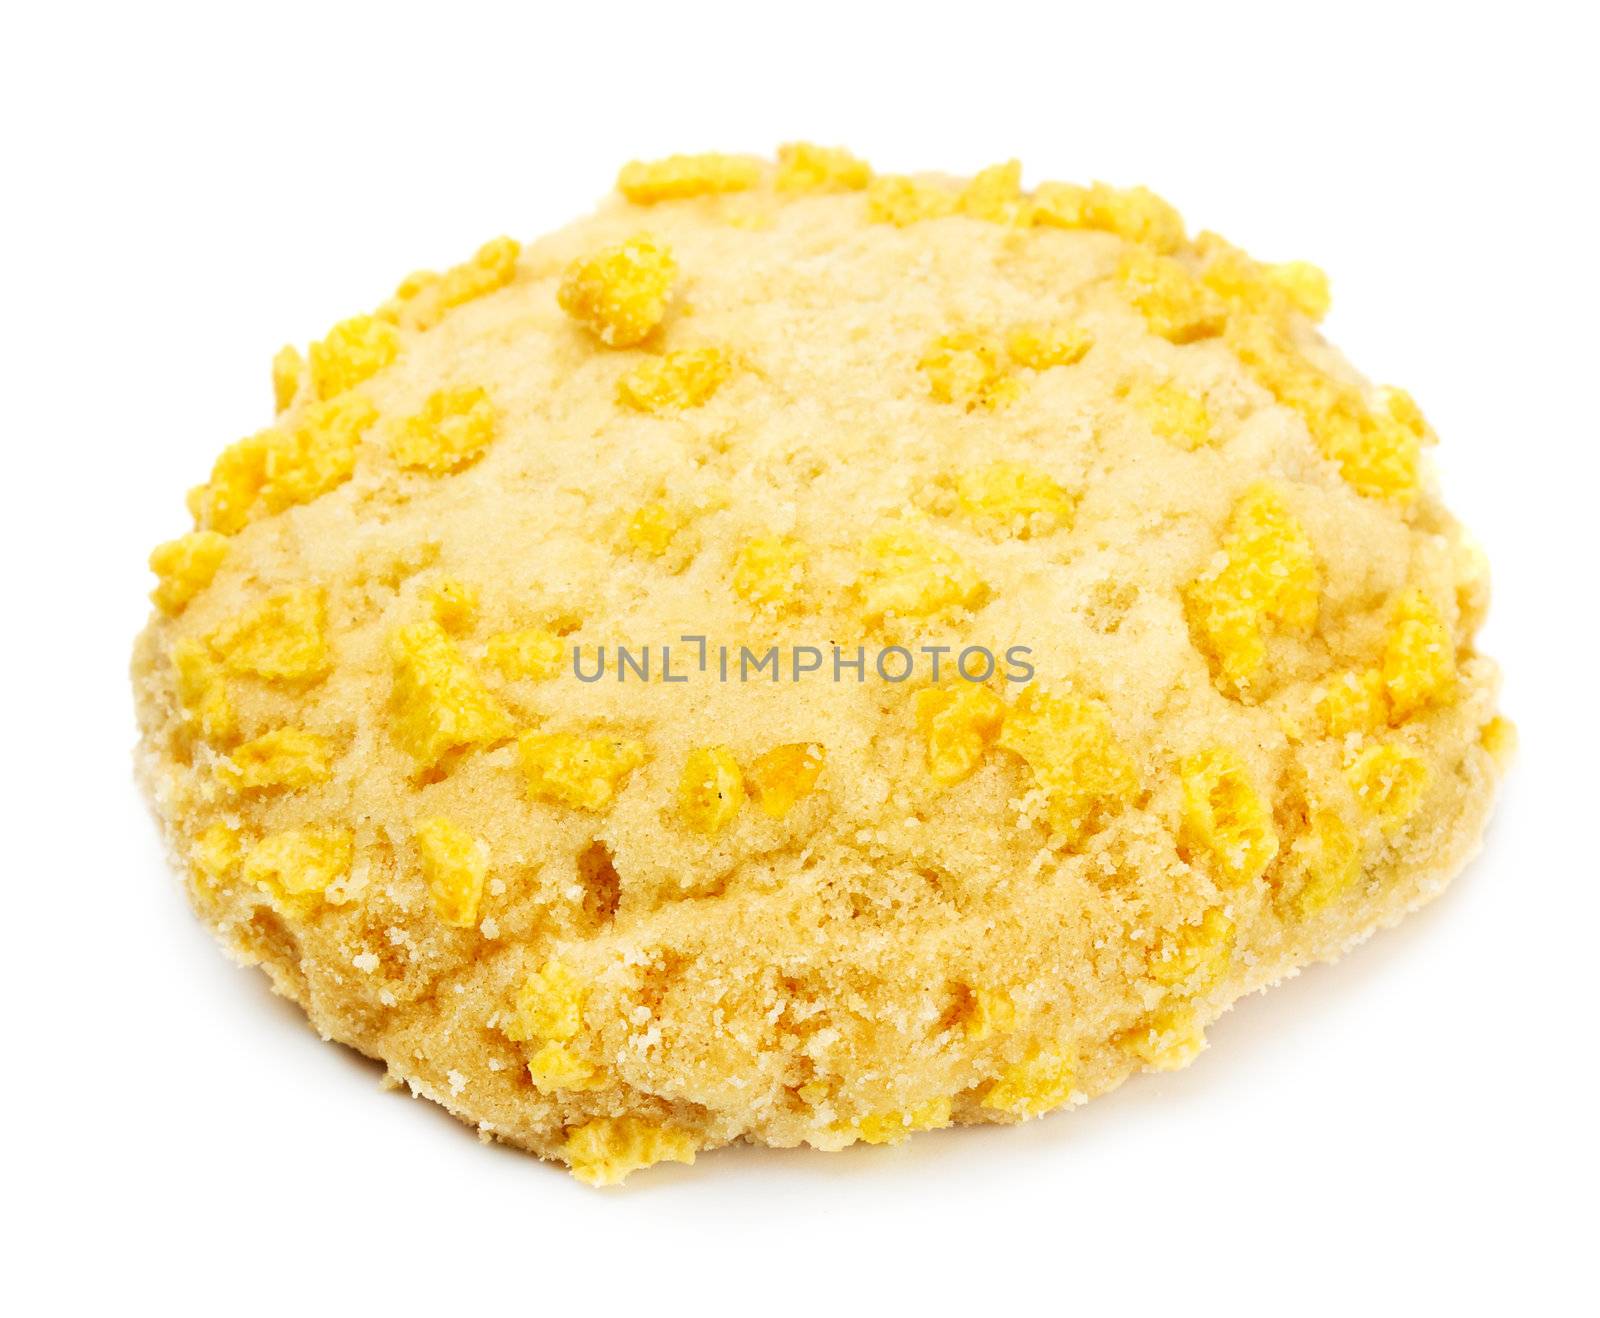 Homemade Cookie With Cornflake Chips by petr_malyshev